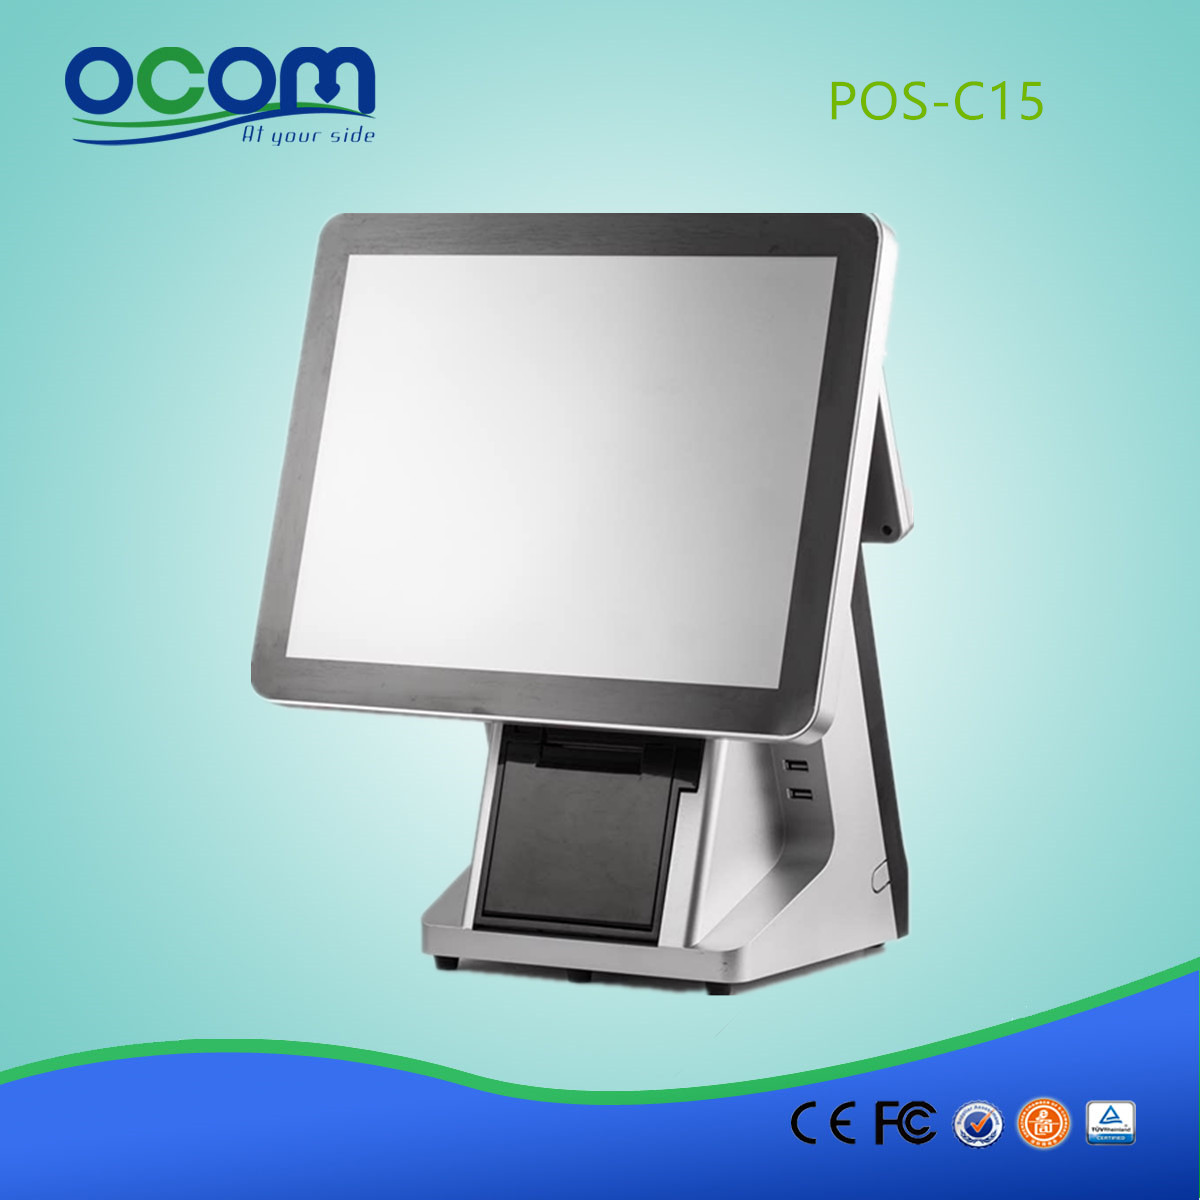 POS-C15-China factory made  J1900 32G SSD 15" all in one touch screen POS terminal price